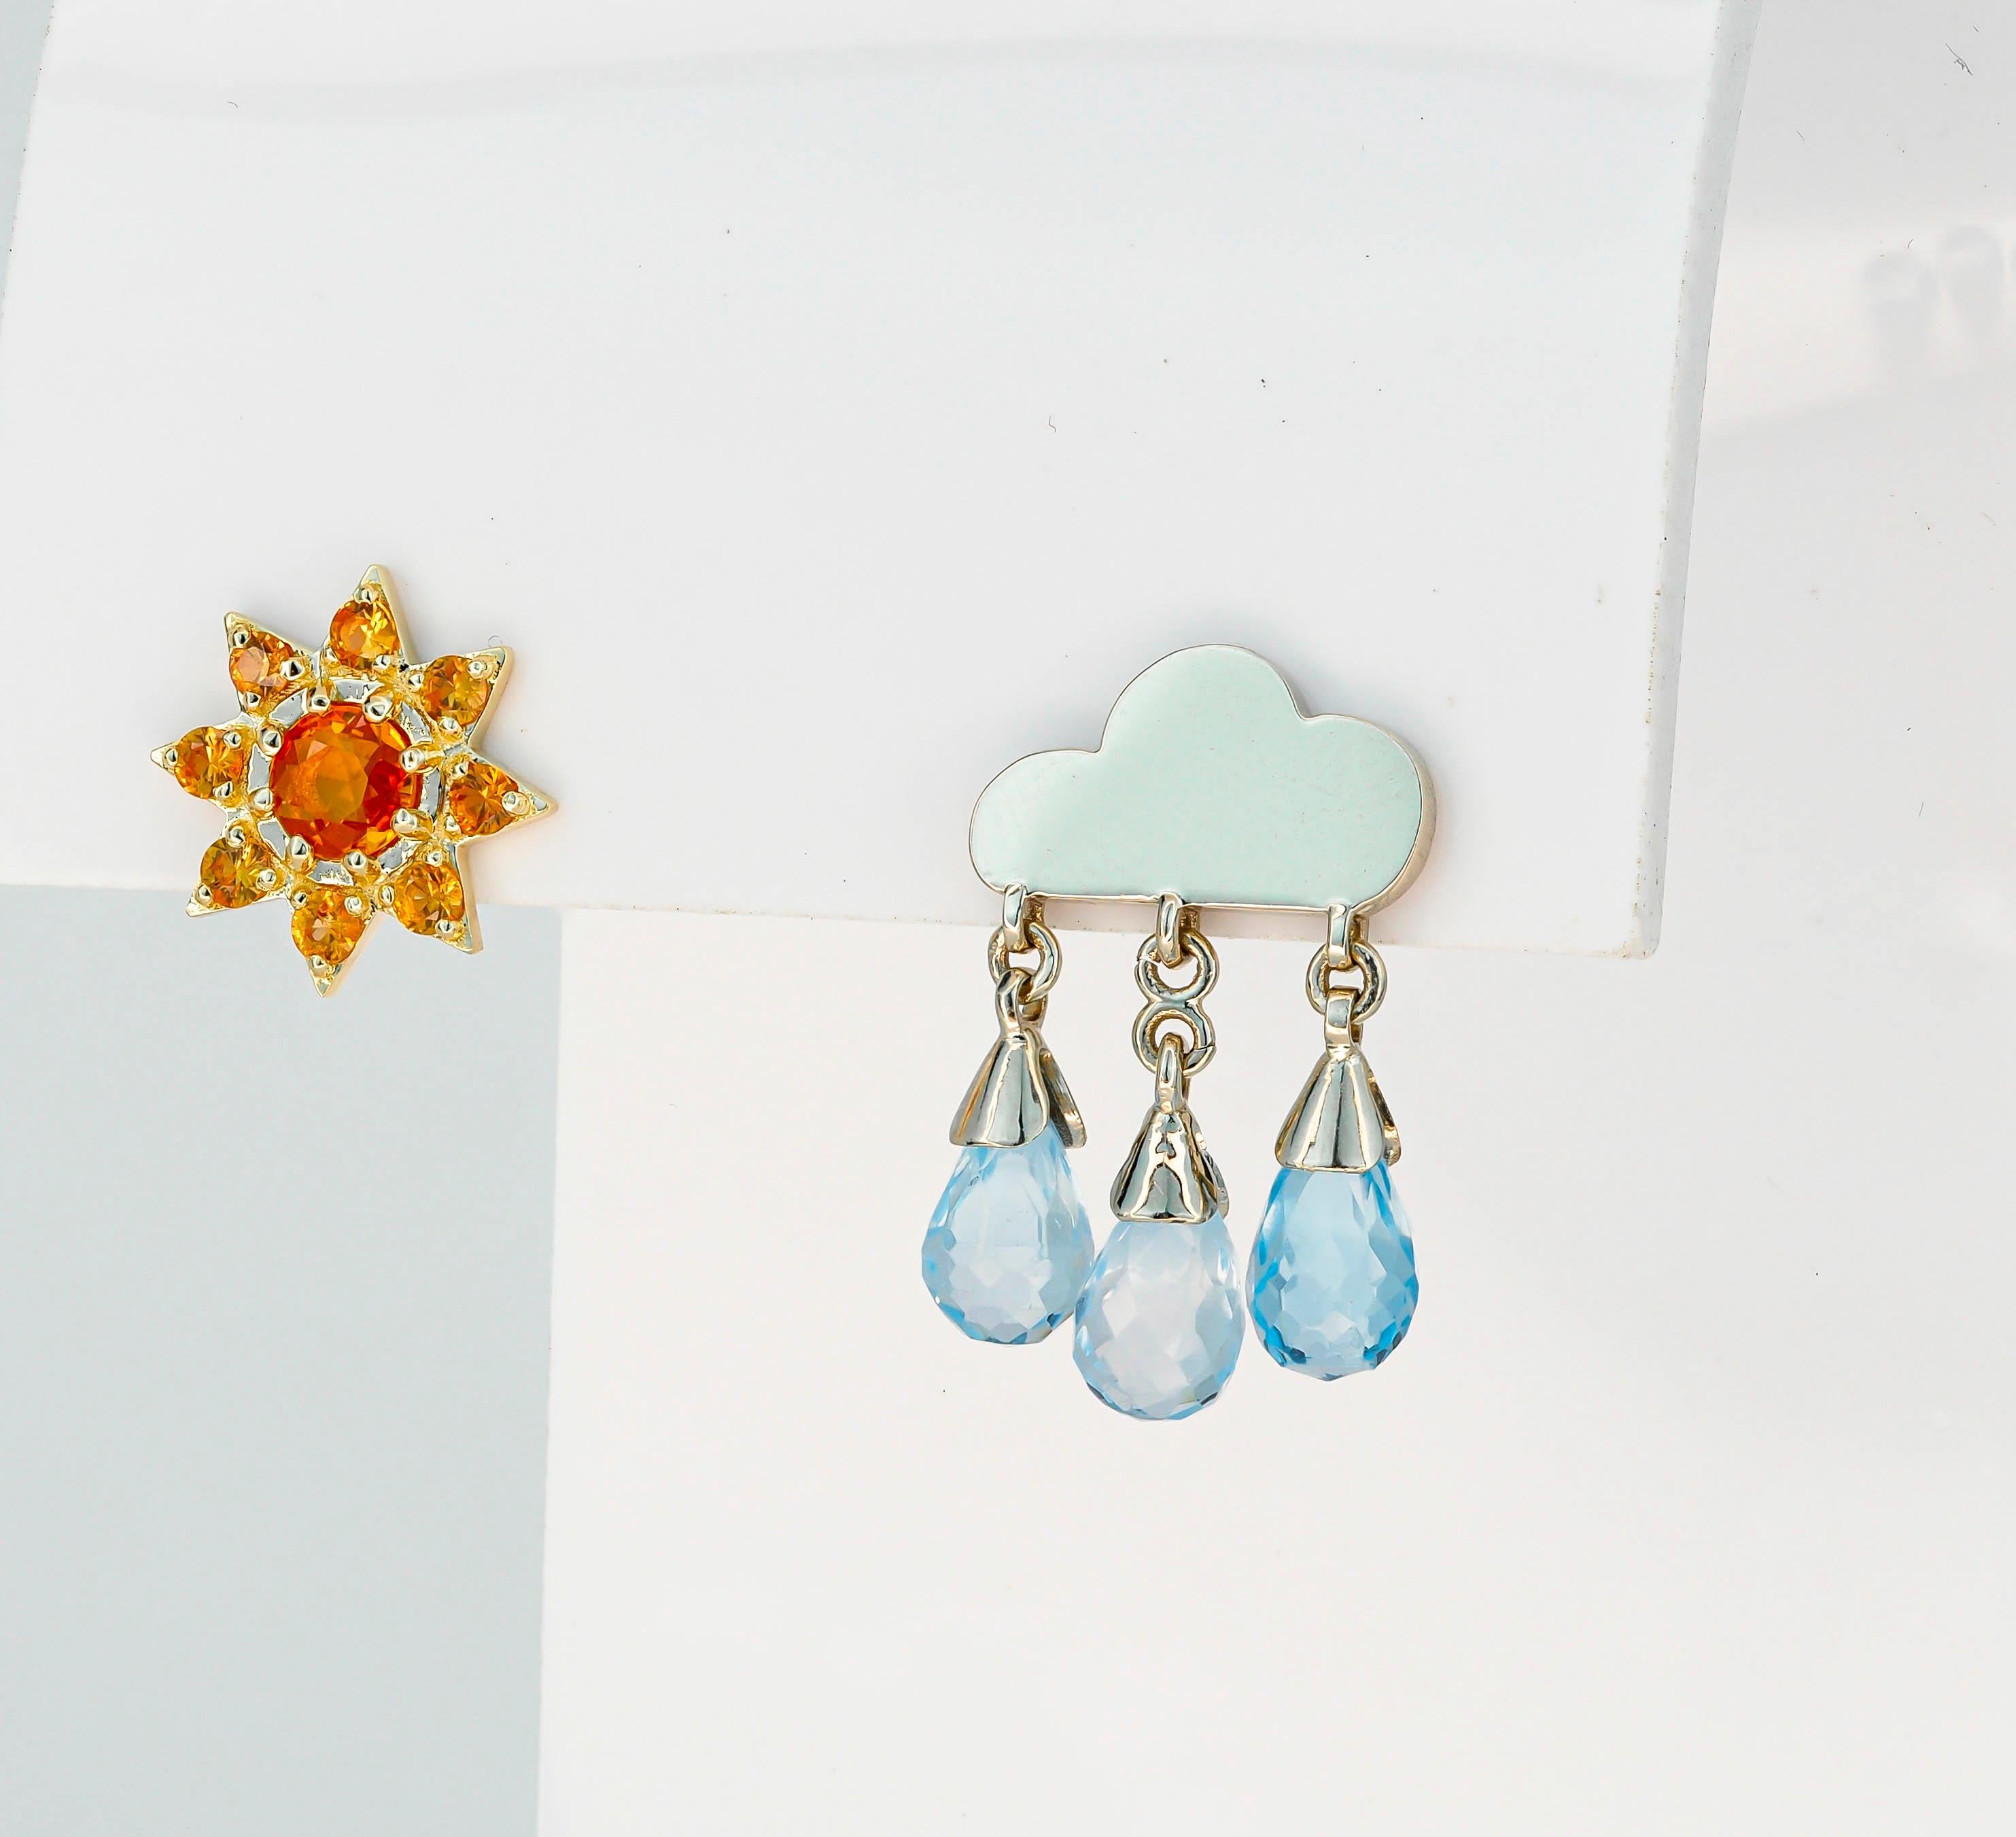 Rain and sun 14k gold earring studs. 
Mismatched earrings. Weather inspired earrings. Natural topaz, sapphire studs. Teardrop earrings.

14k yellow and white gold
Weight: 3.15 g. 

1. Rain cloud
white 14k gold
Size: 19x12mm
Gemstones:
3 topazs, blue